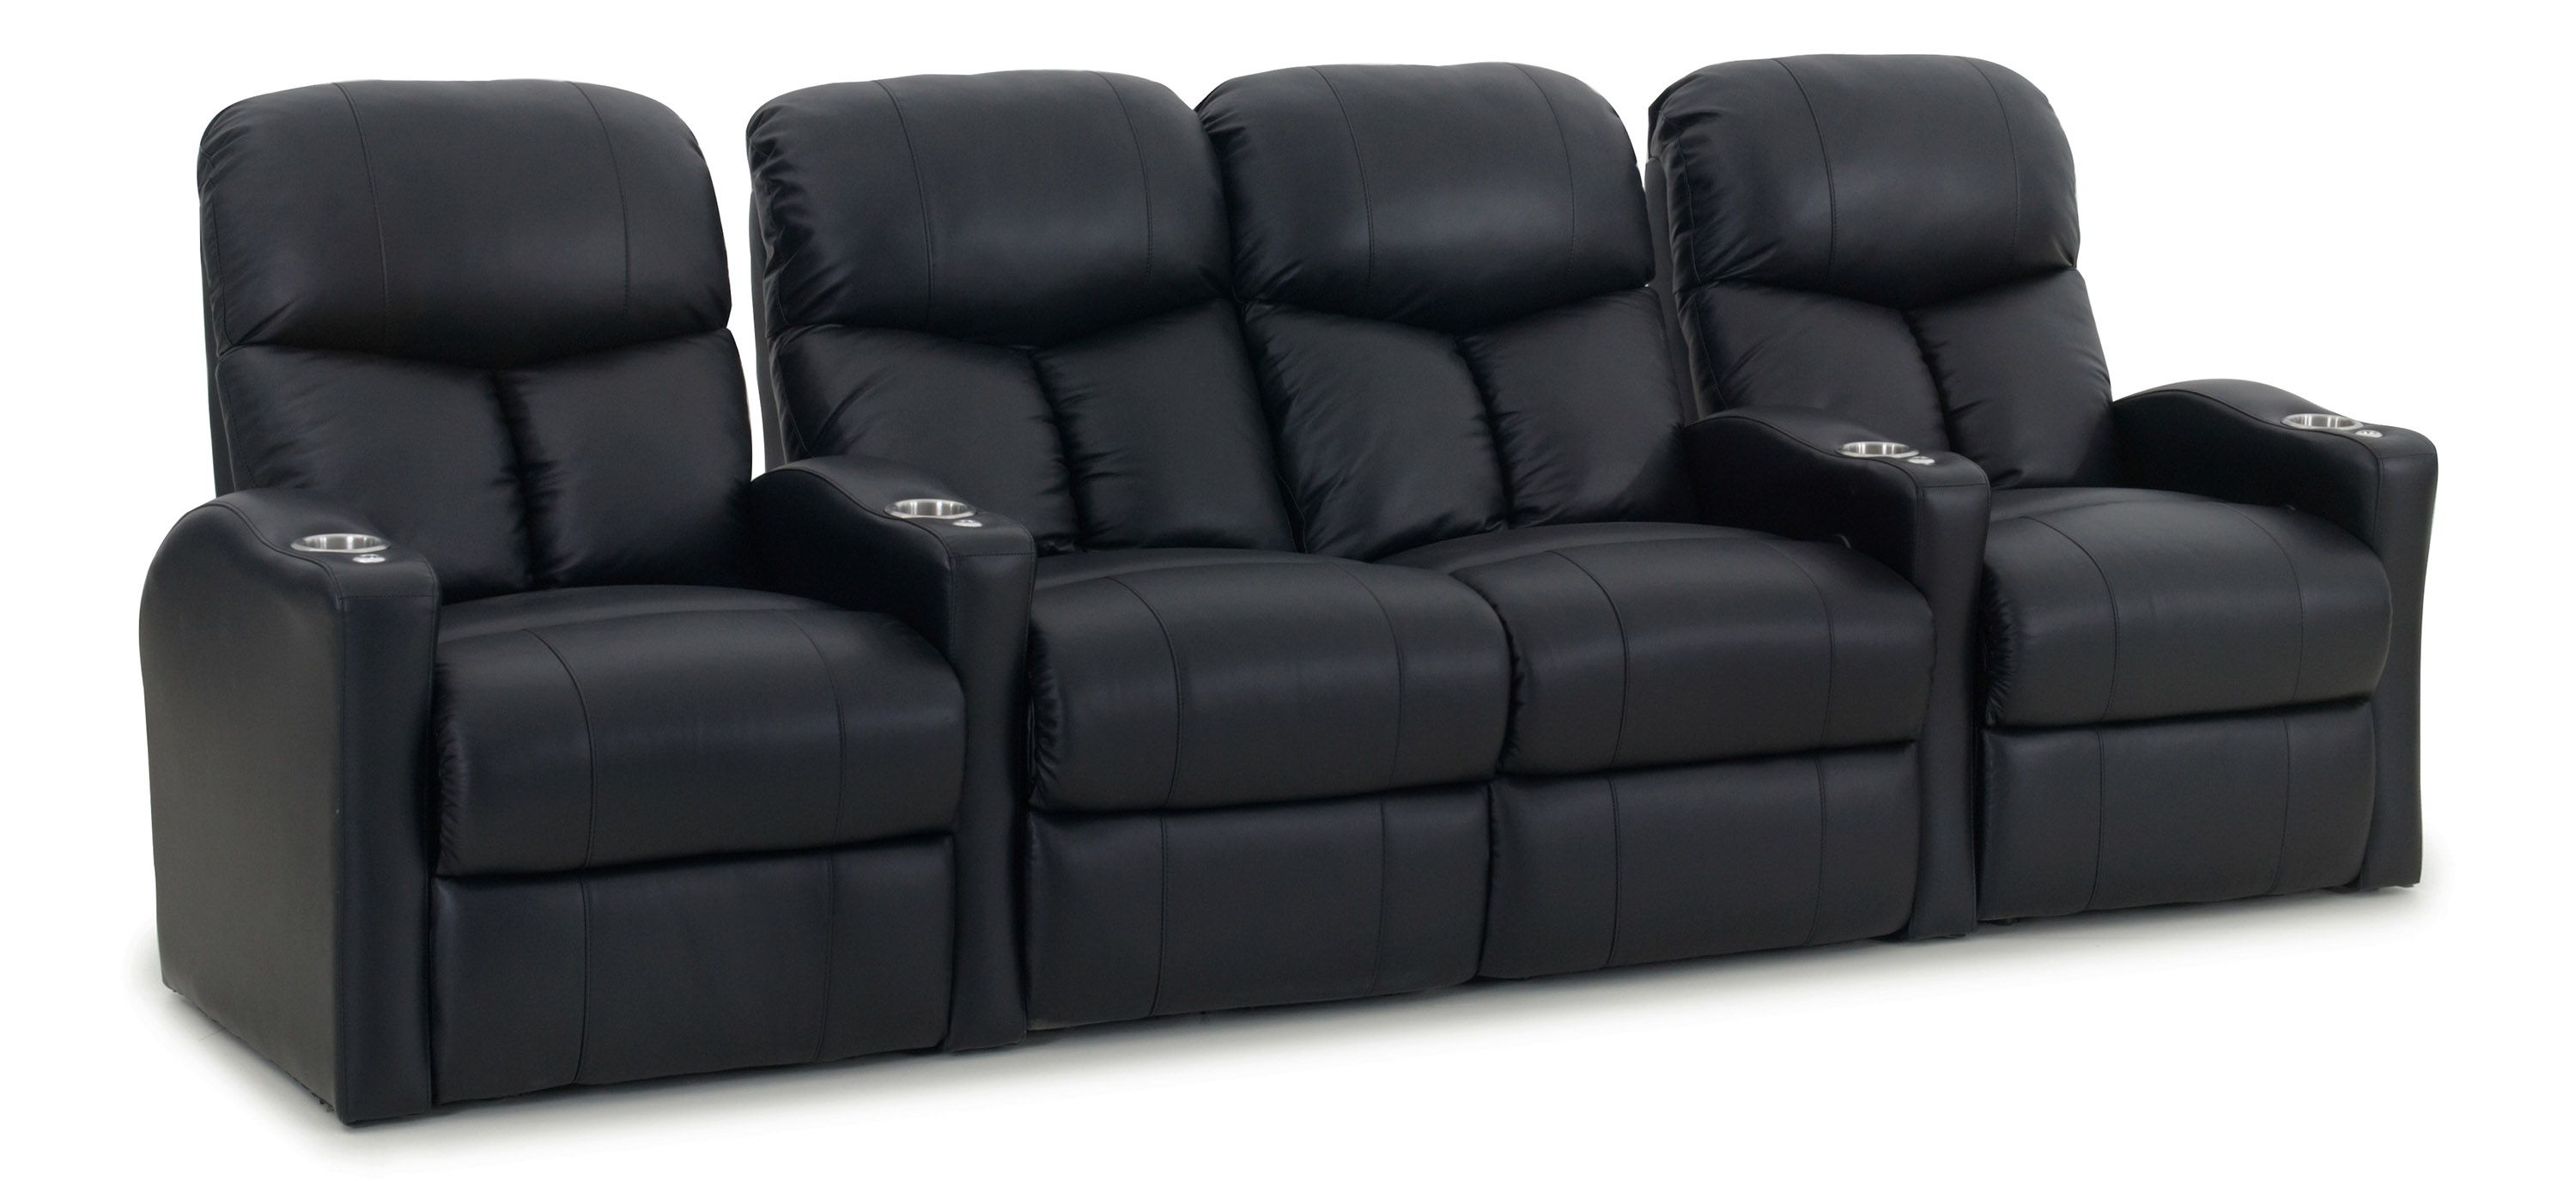 Midway 4-pc. Leather Power-Reclining Sectional Sofa